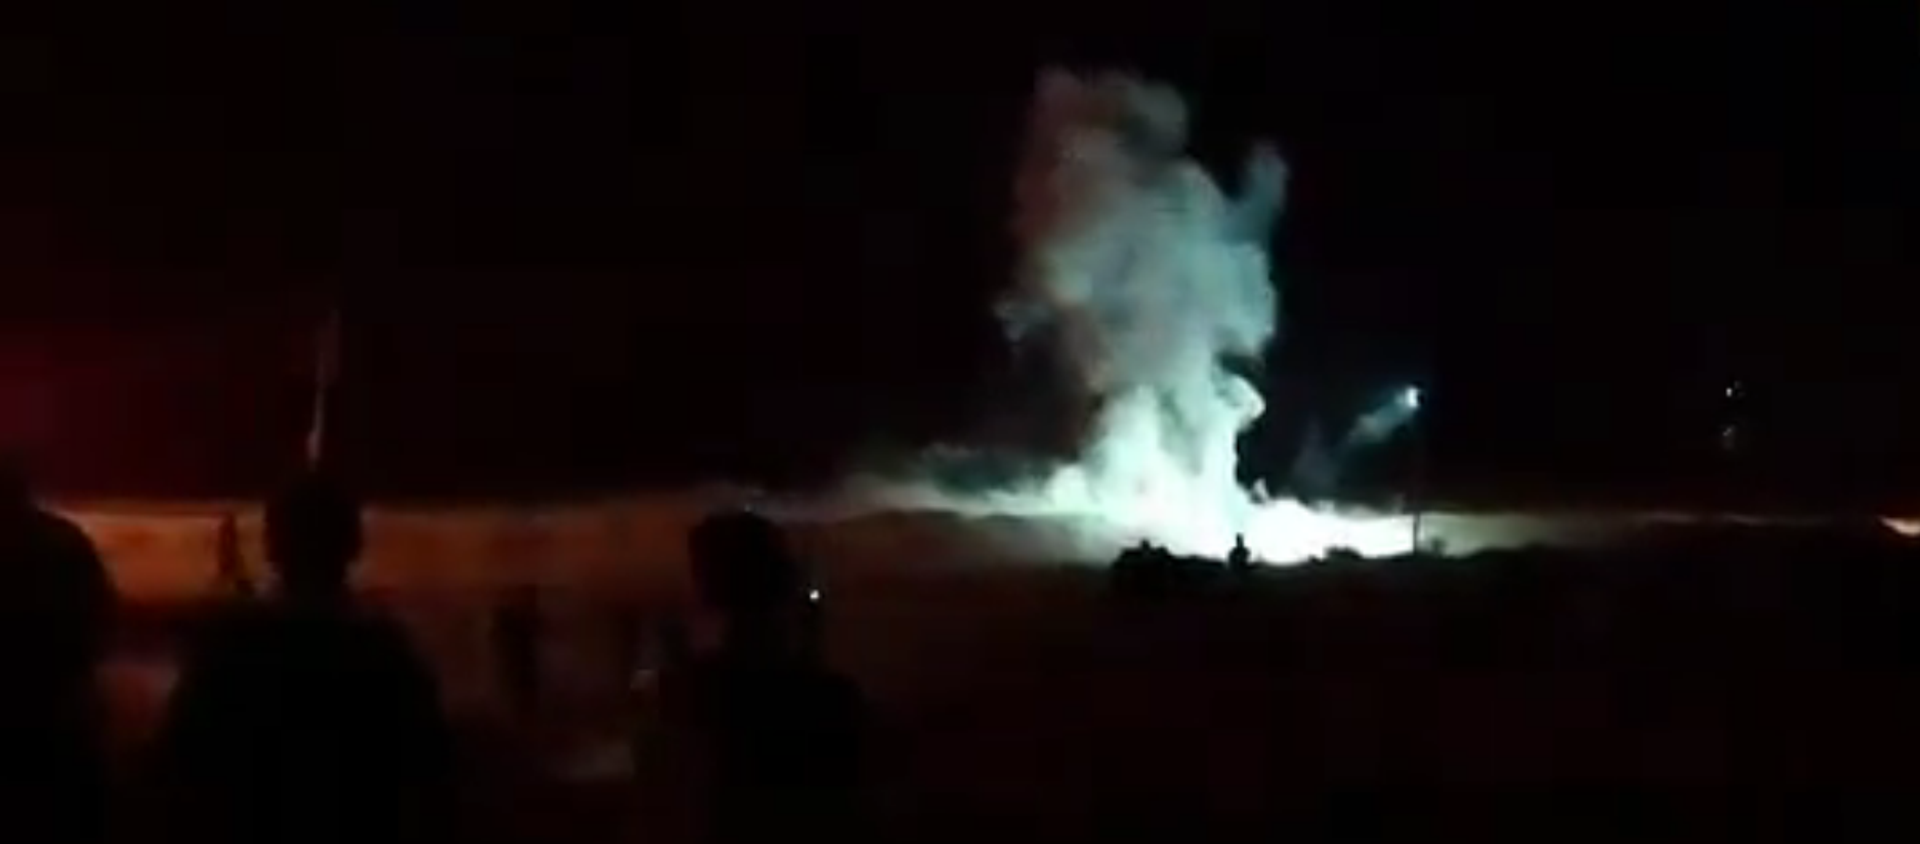 Screenshot from a video allegedly showing an explosion occurring east of Gaza City during night border protests on Saturday - Sputnik International, 1920, 28.08.2021